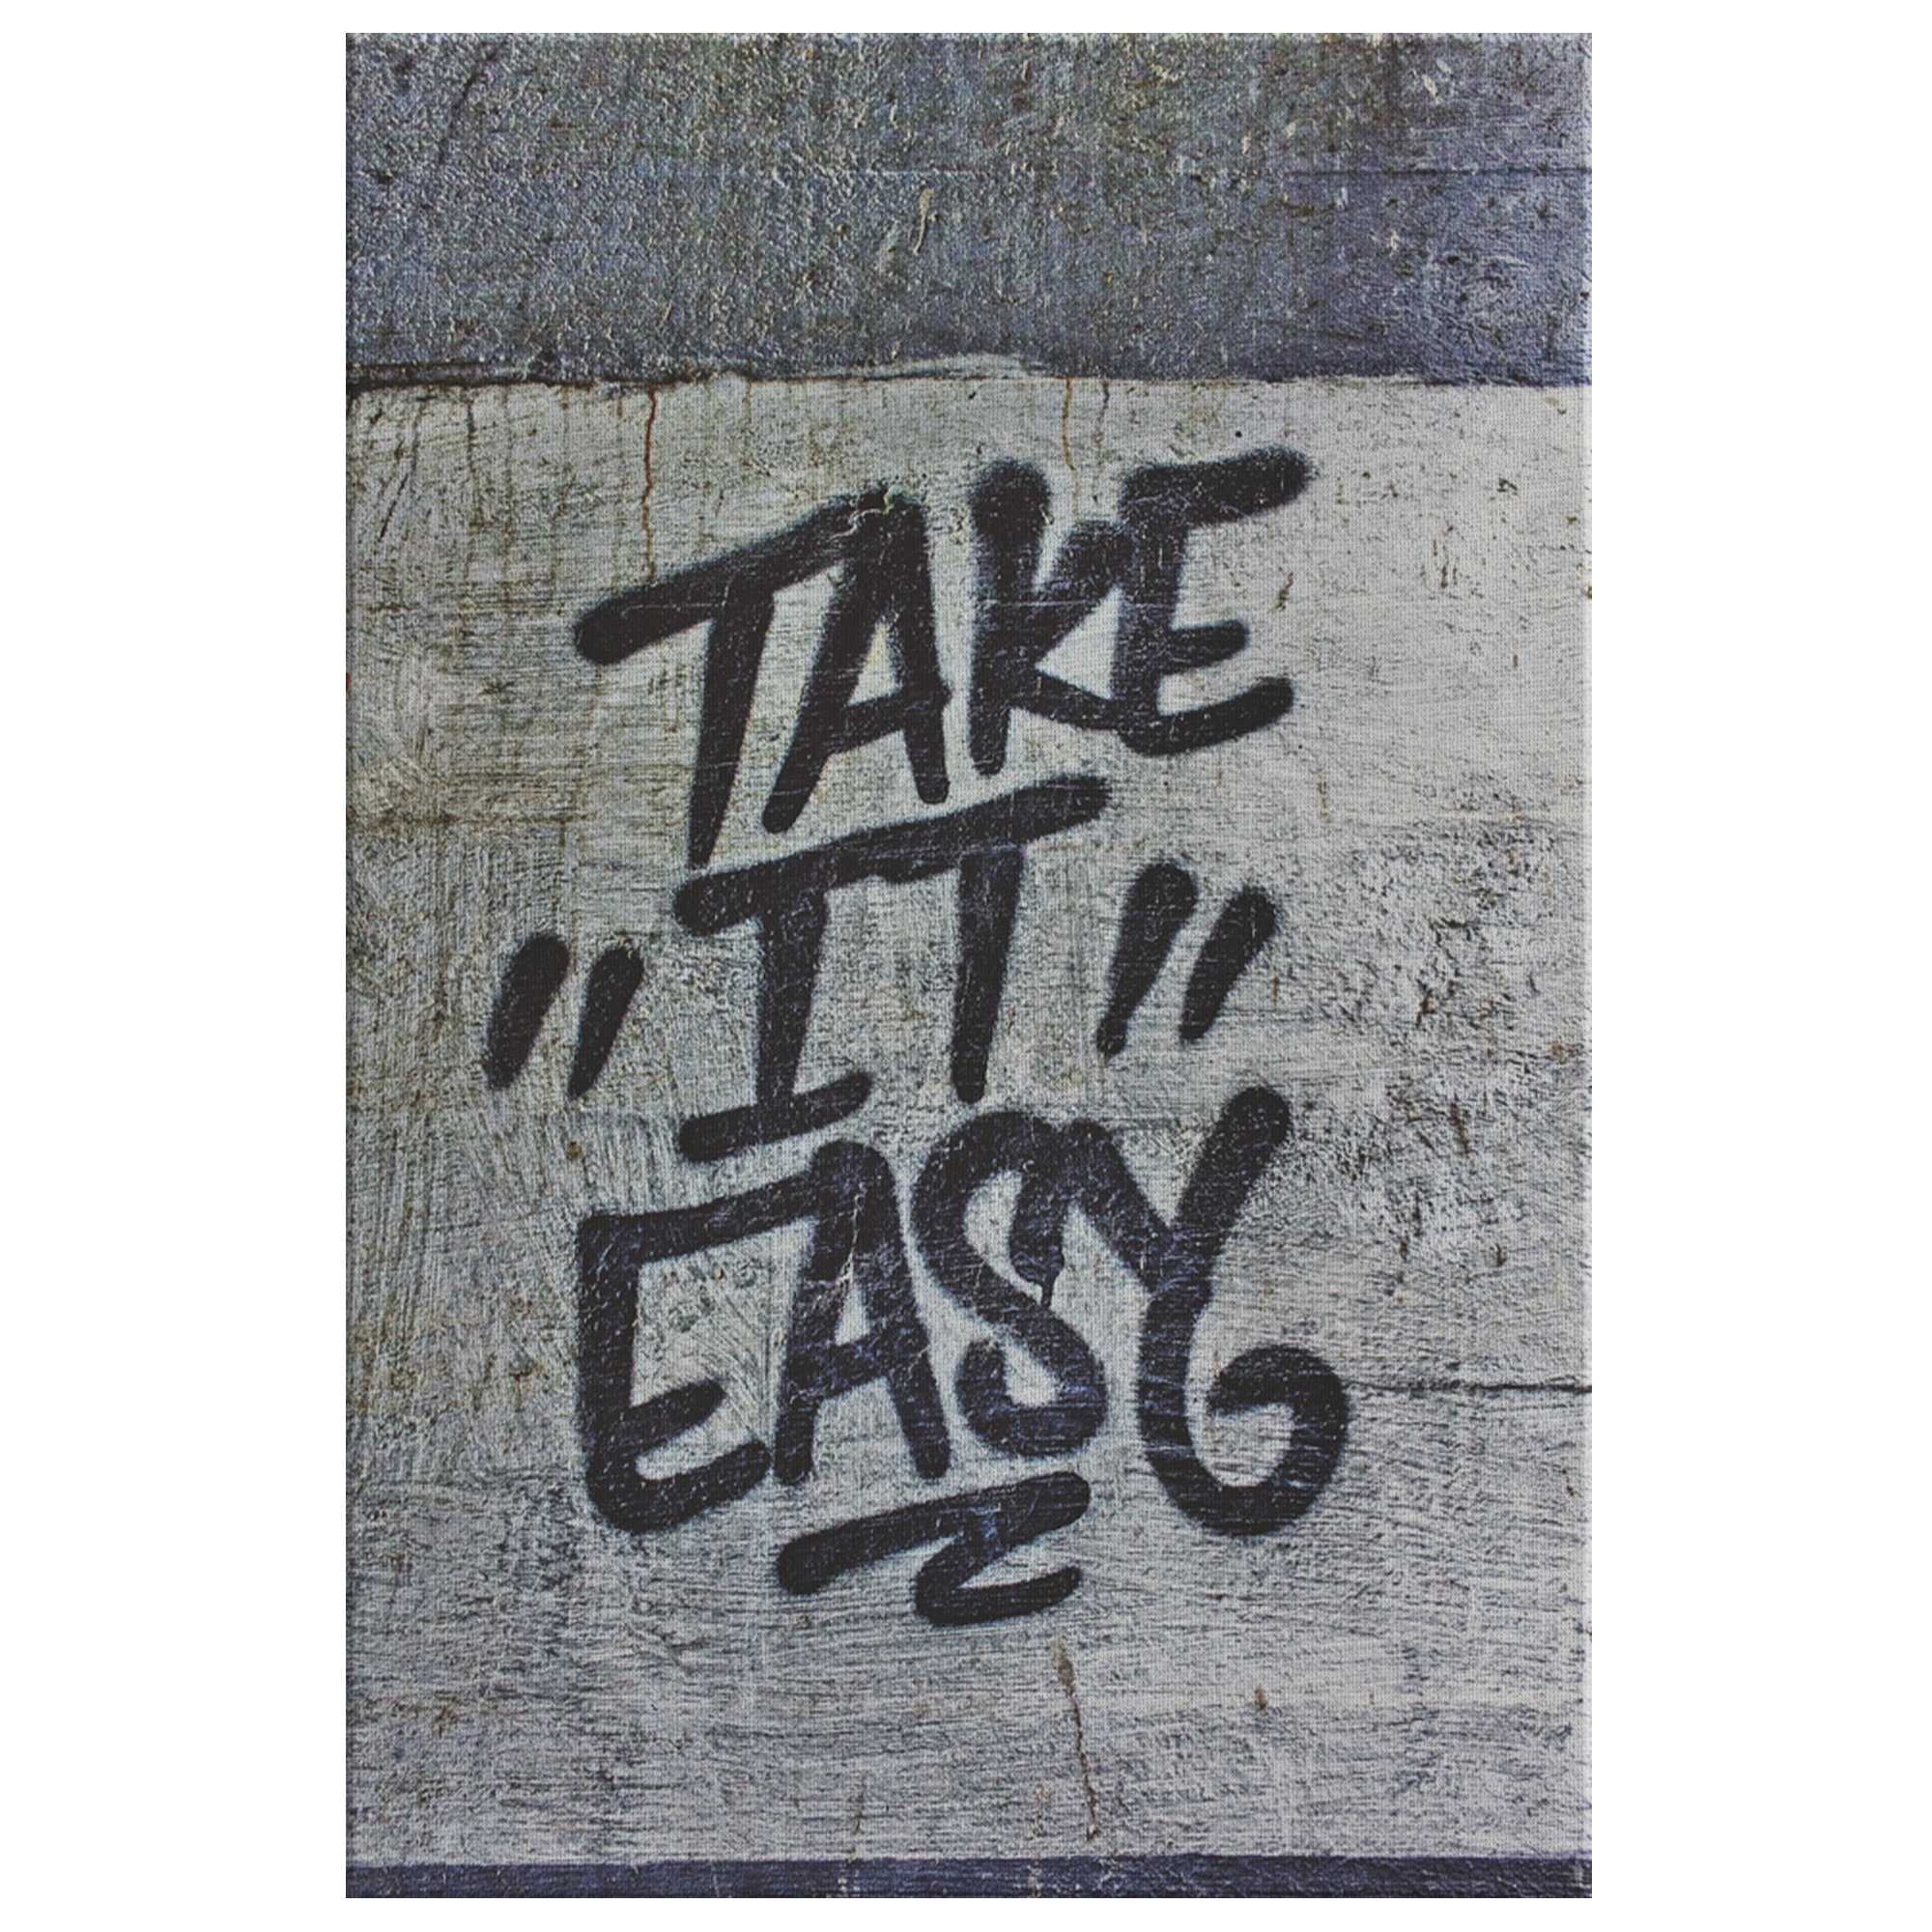 Take It Easy - Blend On Canvas